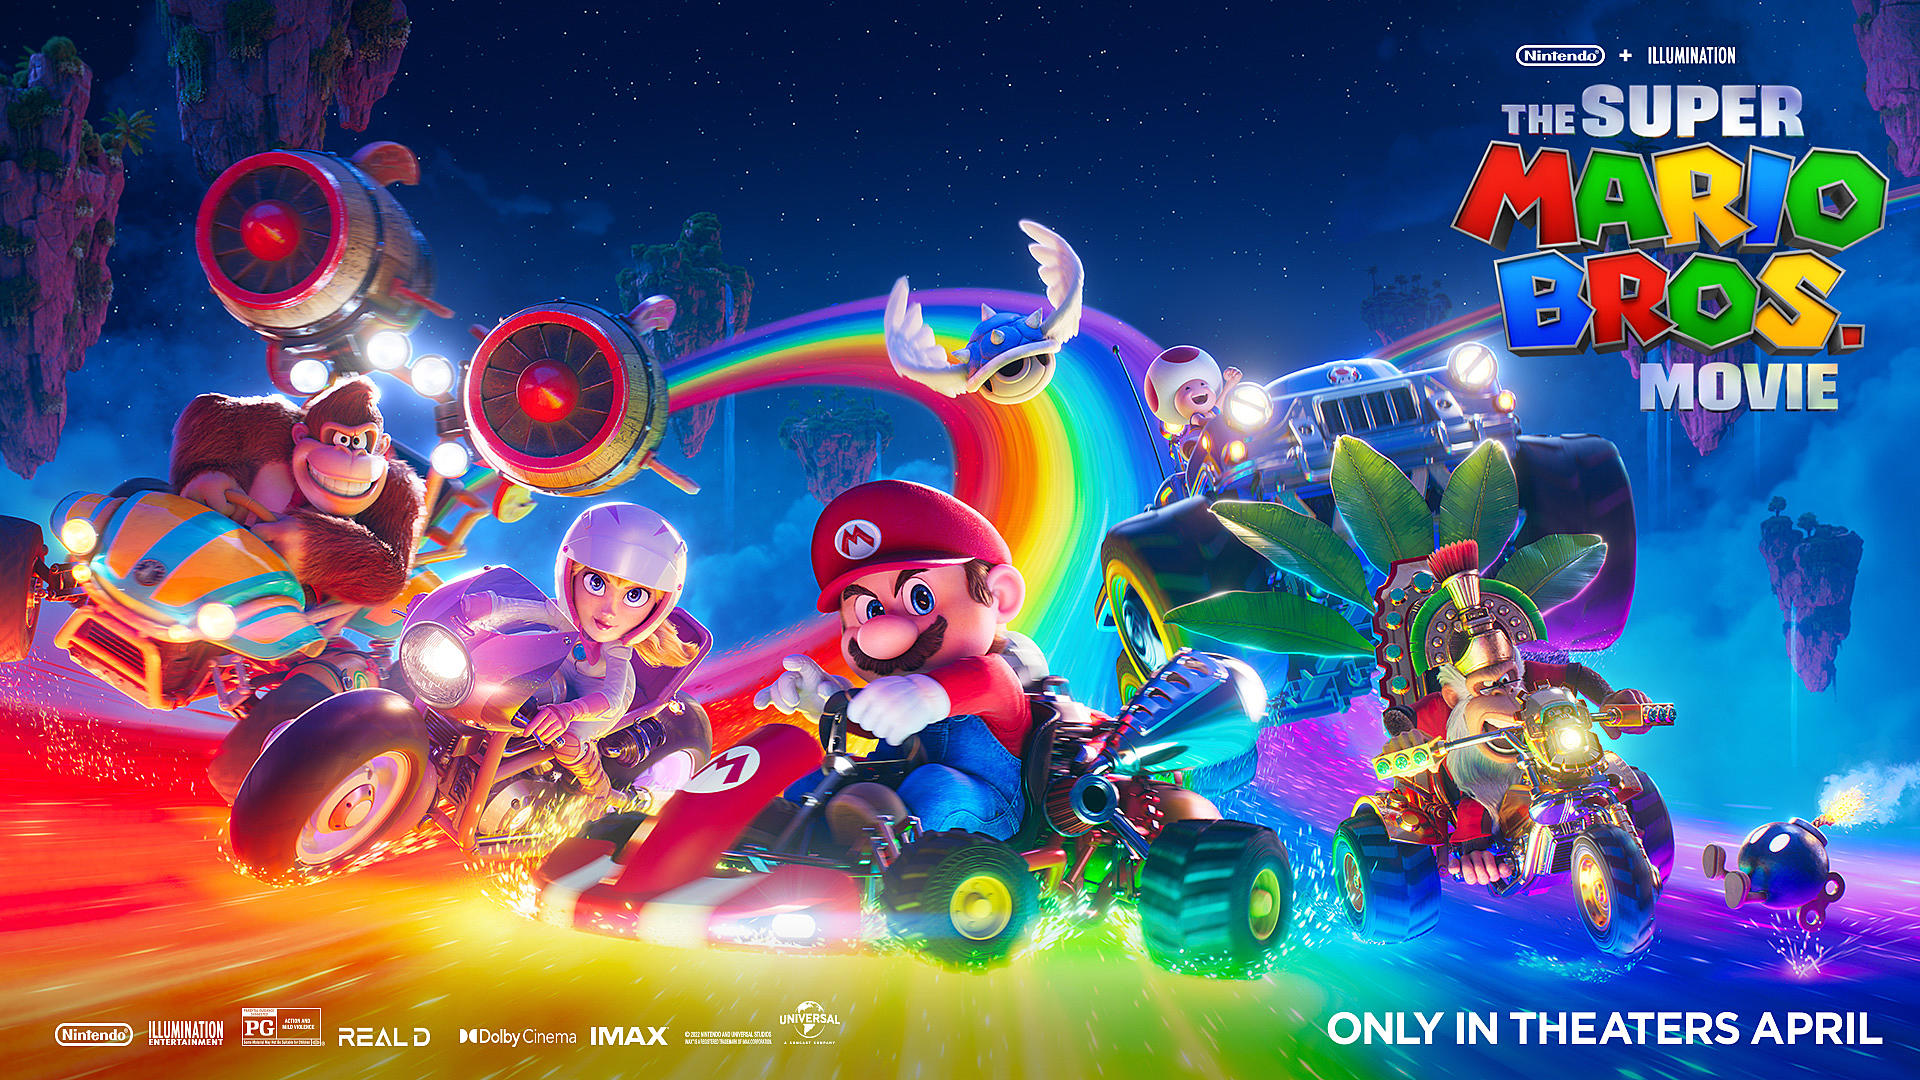 Mario Kart Porn Game - The Race Is On in New 'Super Mario Bros. Movie' Poster